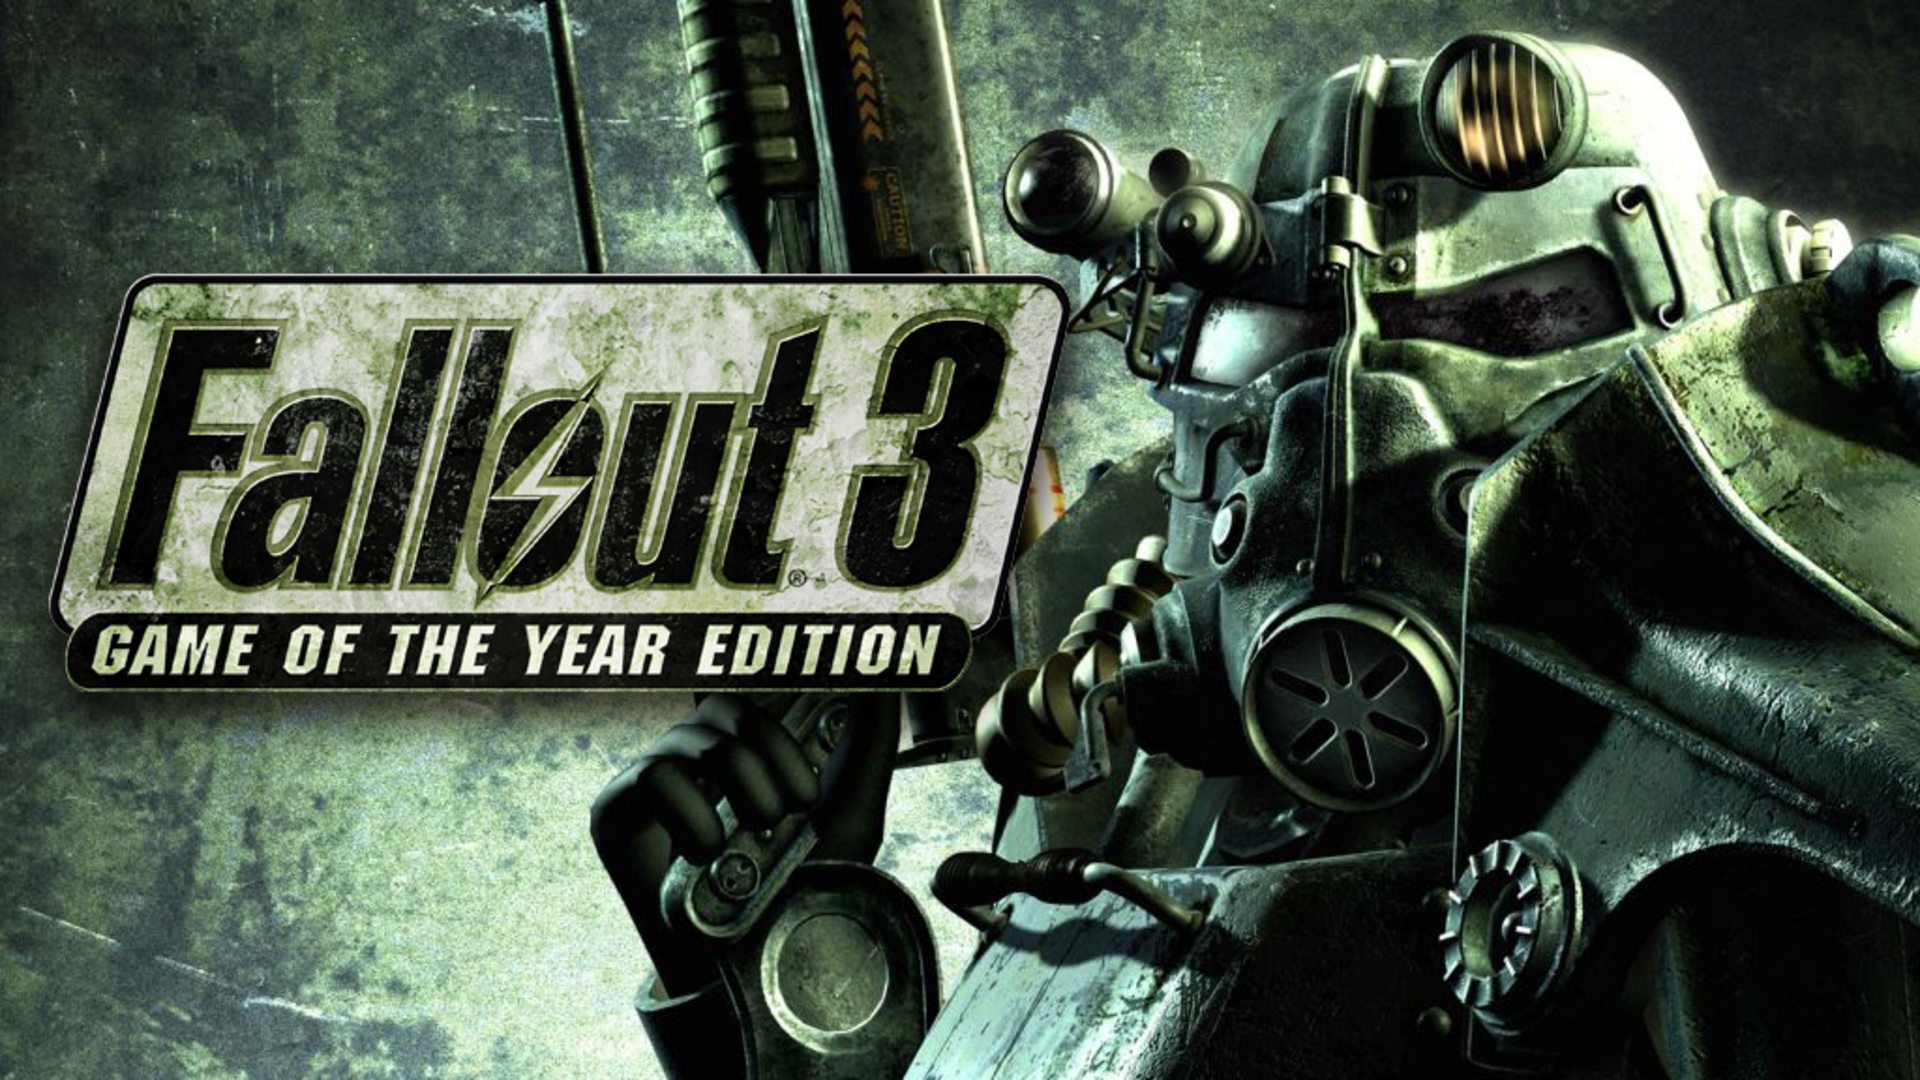 download the last version for ipod Fallout 3: Game of the Year Edition